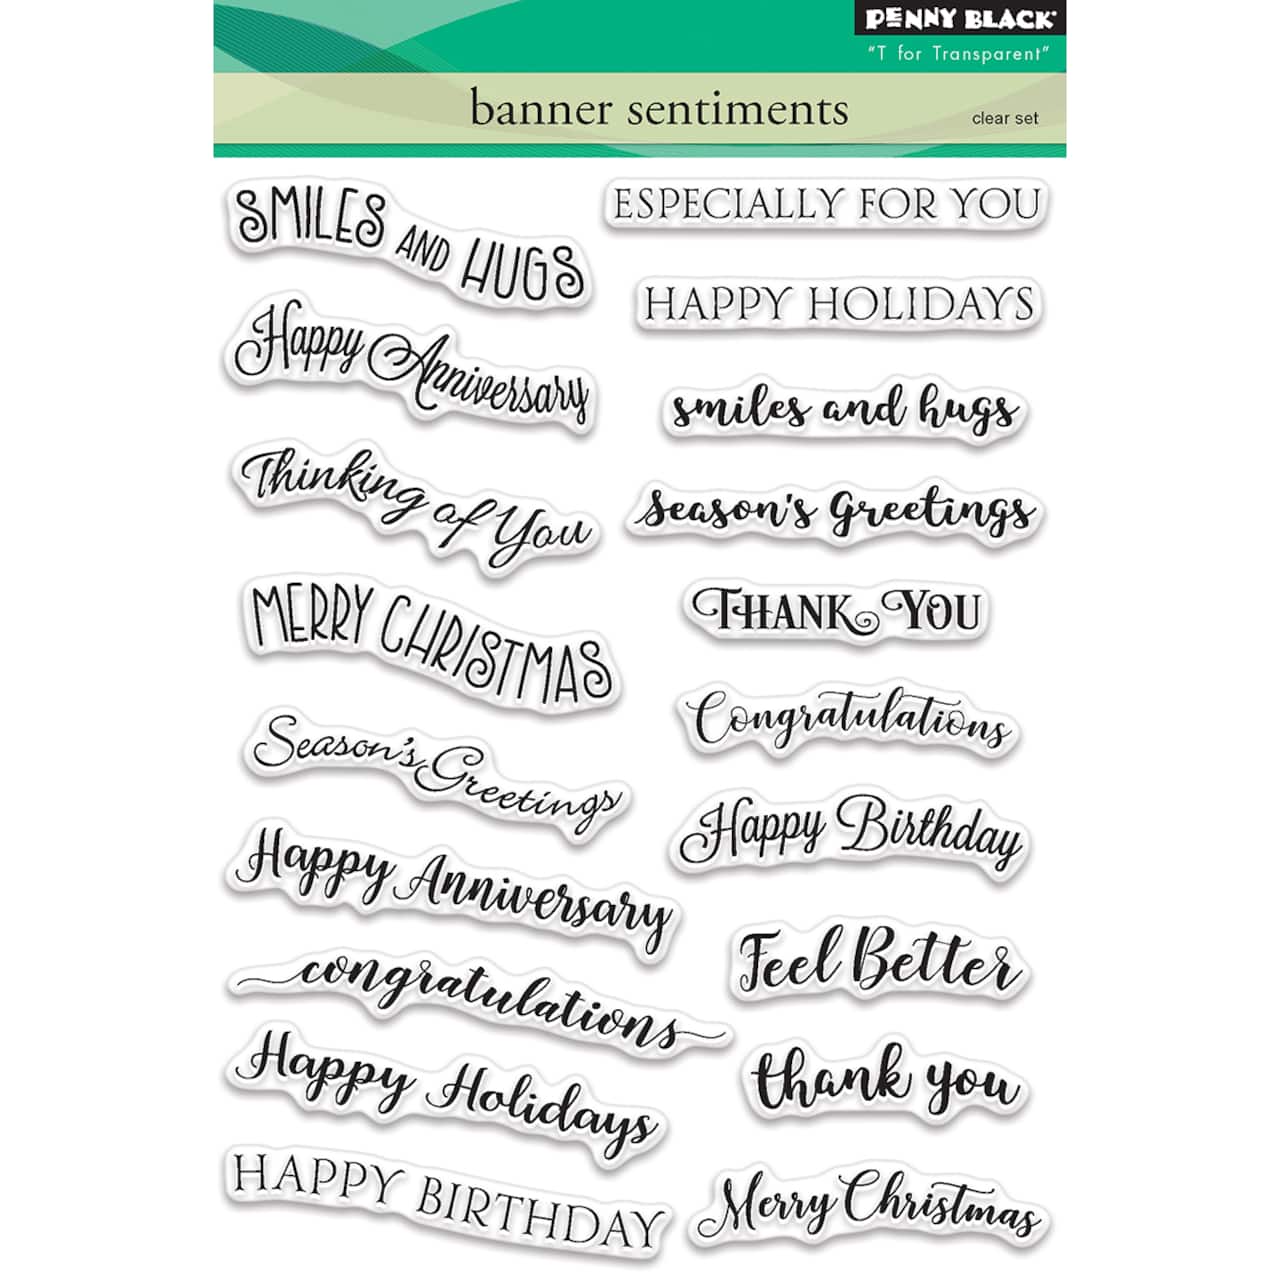 Penny Black Banner Sentiments Clear Stamps